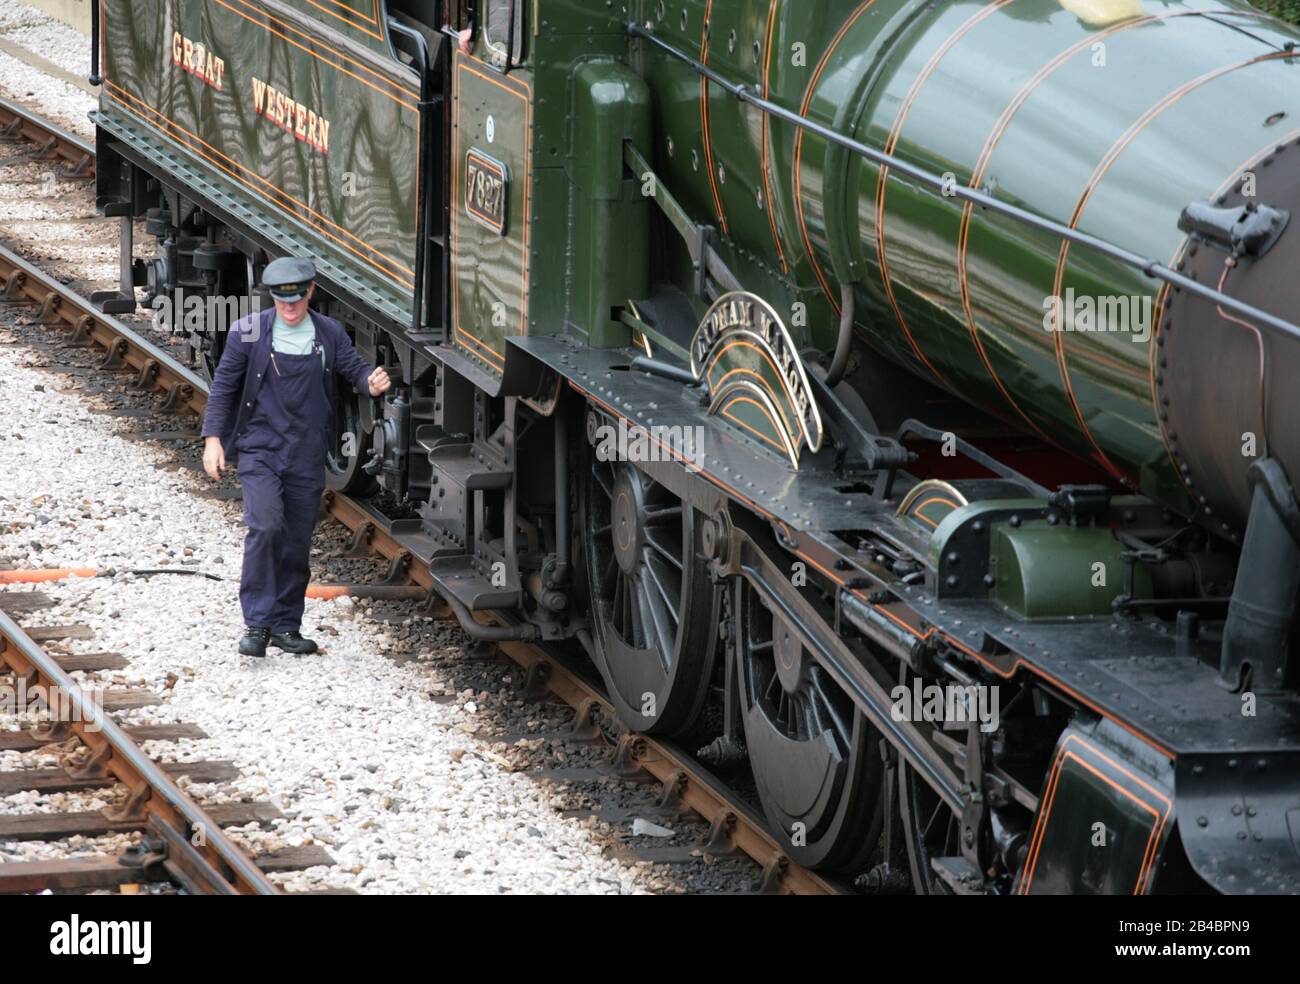 GWR 'Manor' class locomotive No. 7827 'Lydham Manor' at Kingswear Station on the Dartmouth Steam Railway: fireman alights from the cab: Devon, England Stock Photo